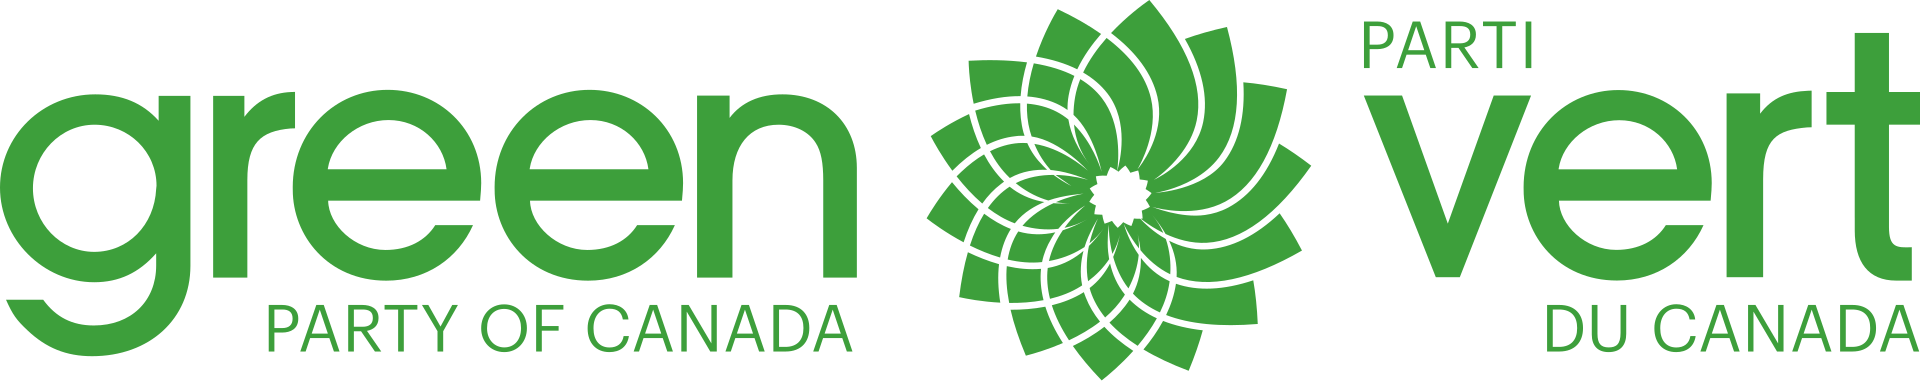 1920px-Green_Party_of_Canada_logo.svg.png